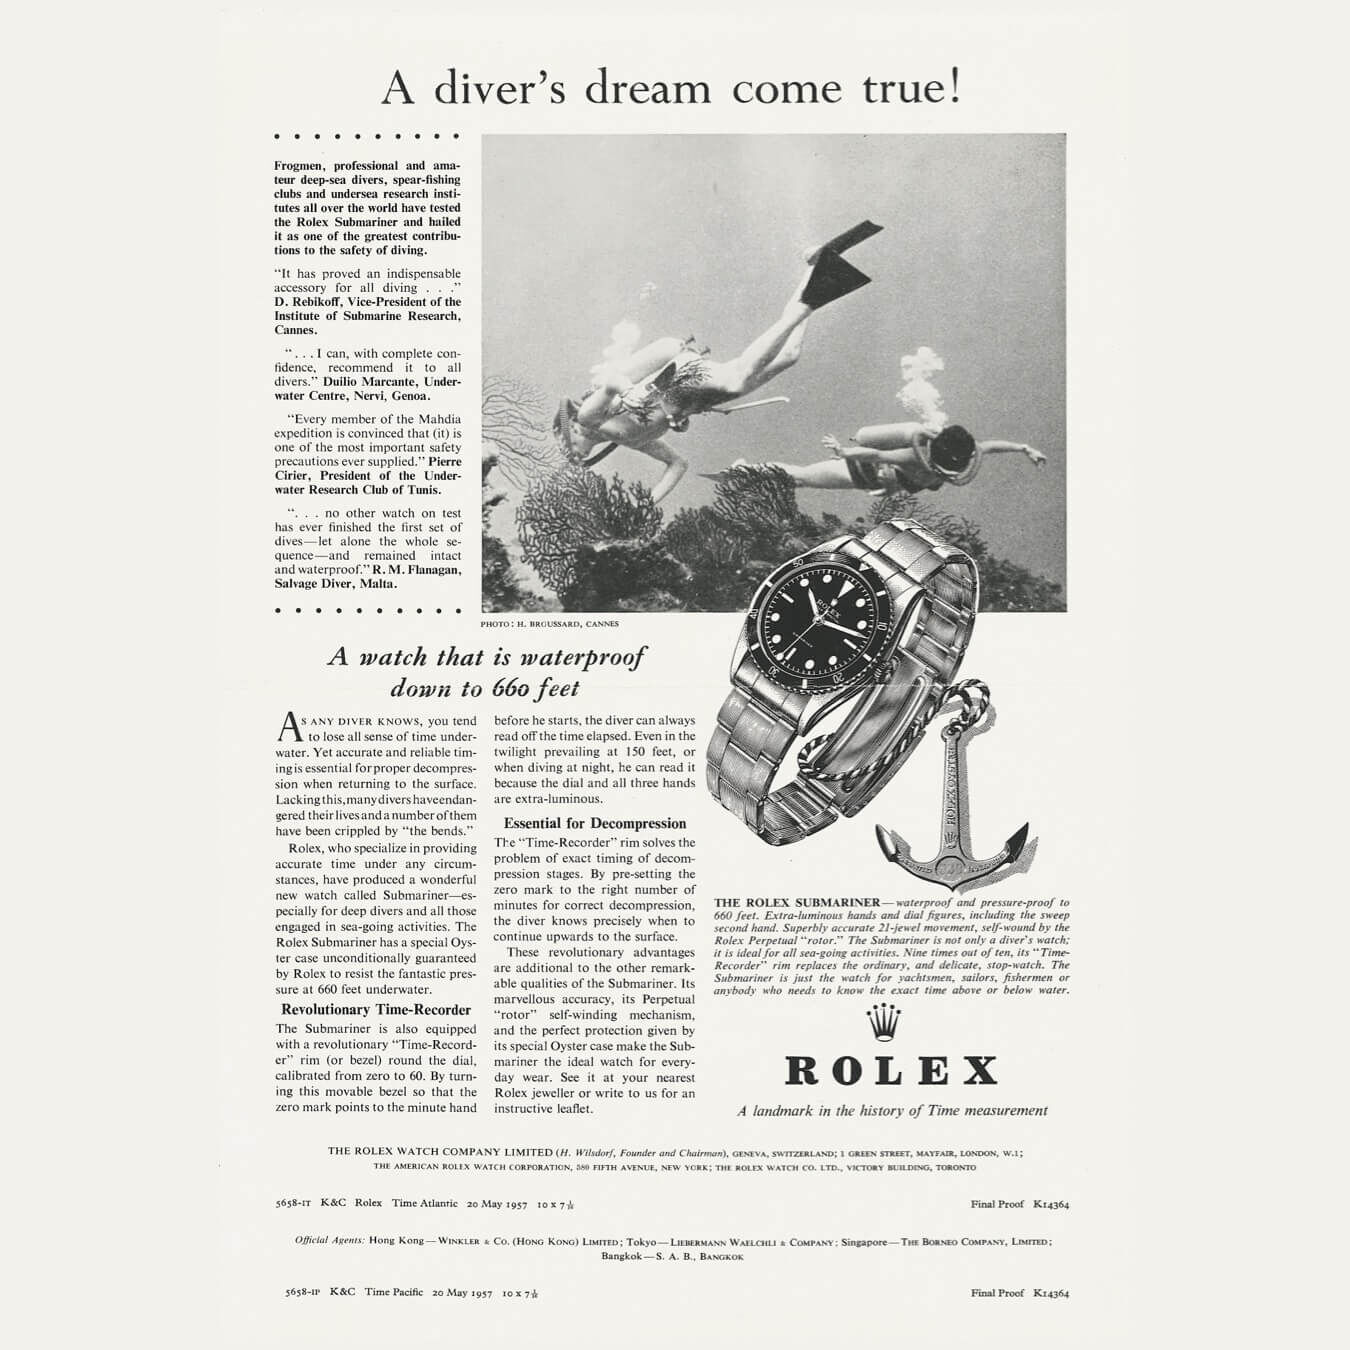 An old ad from the 1950s that corresponds with the historic release of the Rolex Submariner divers' watch